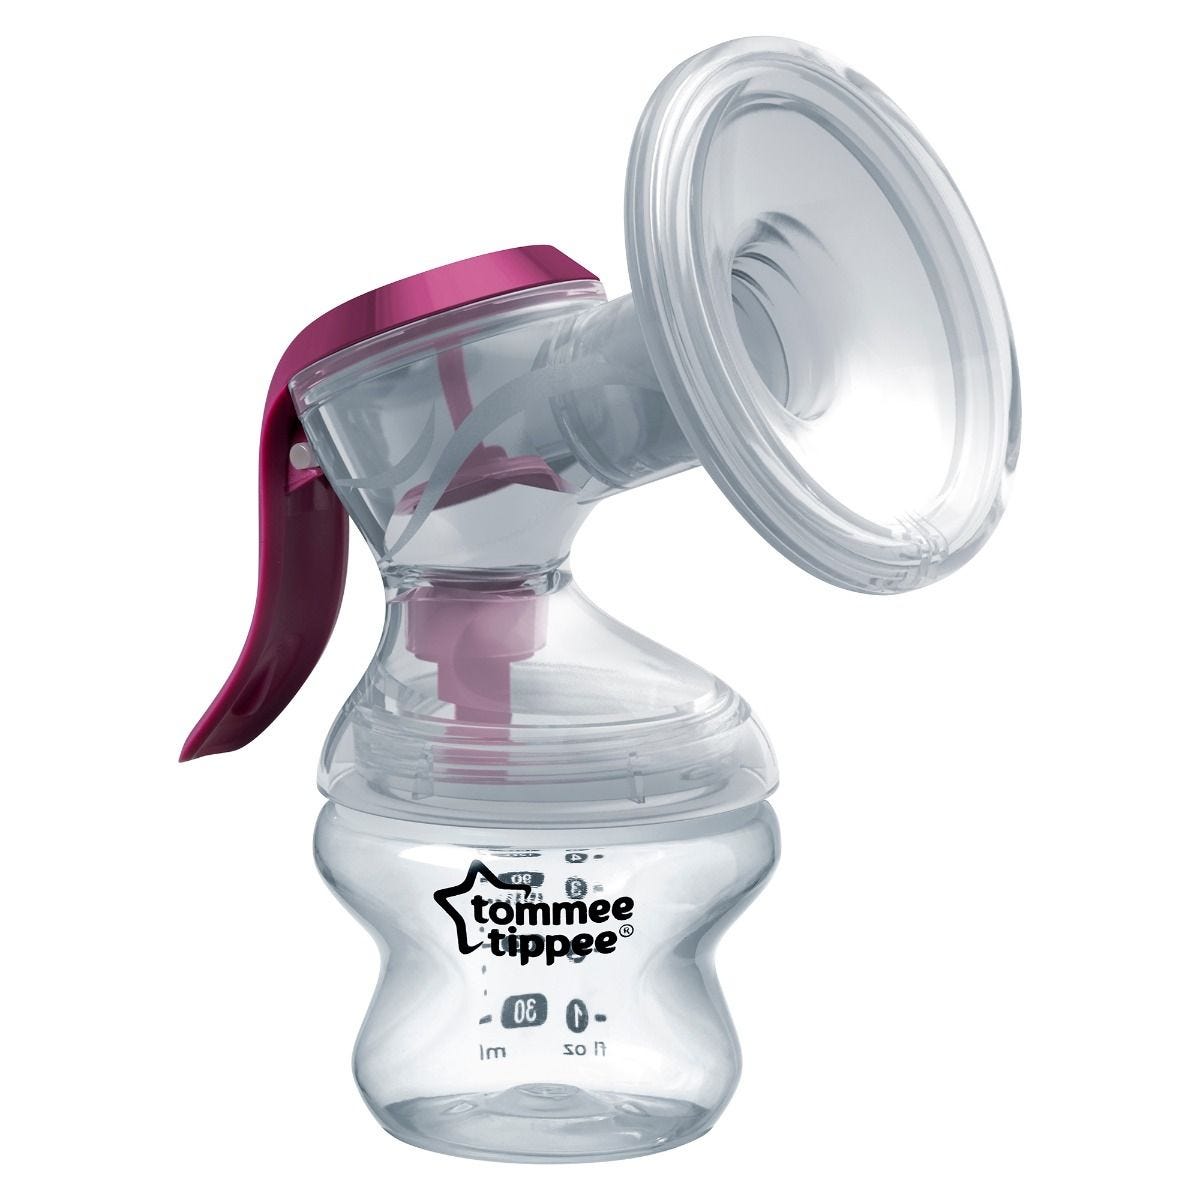 Tommee Tippee Manual Breast Pump Instructions Manual